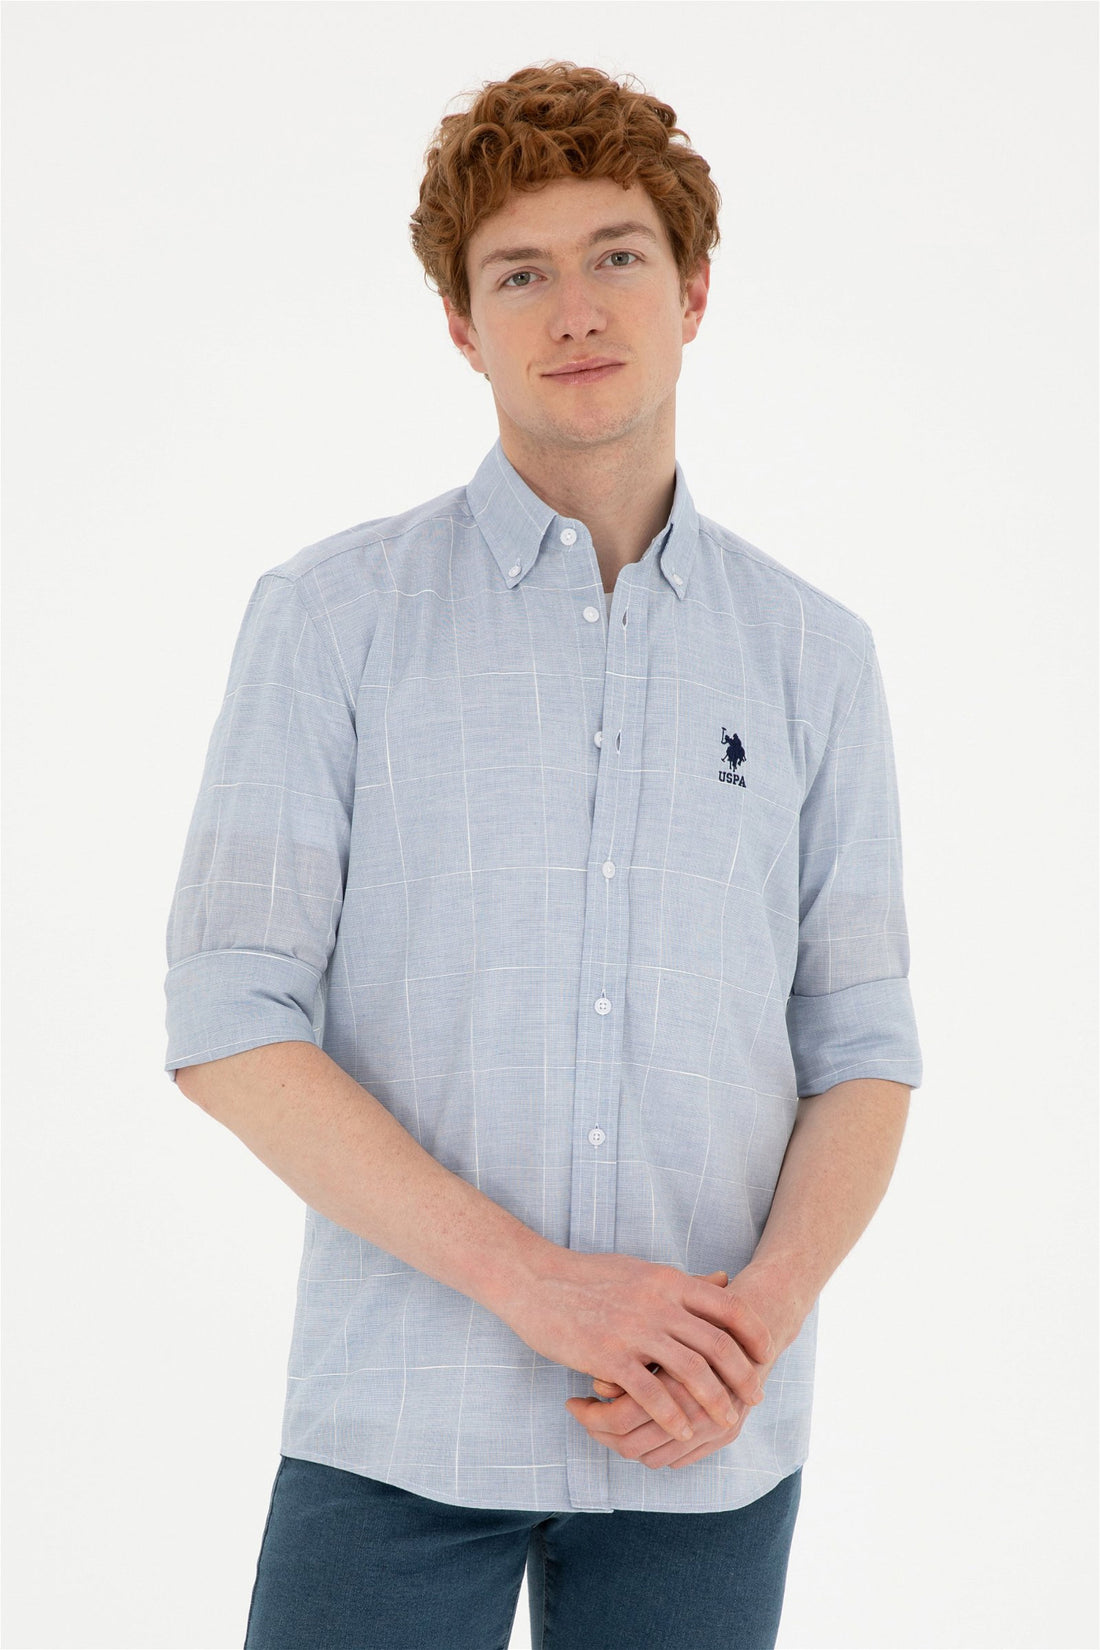 Button Down Shirt With Logo_G081GL0040 1831914_VR032_01